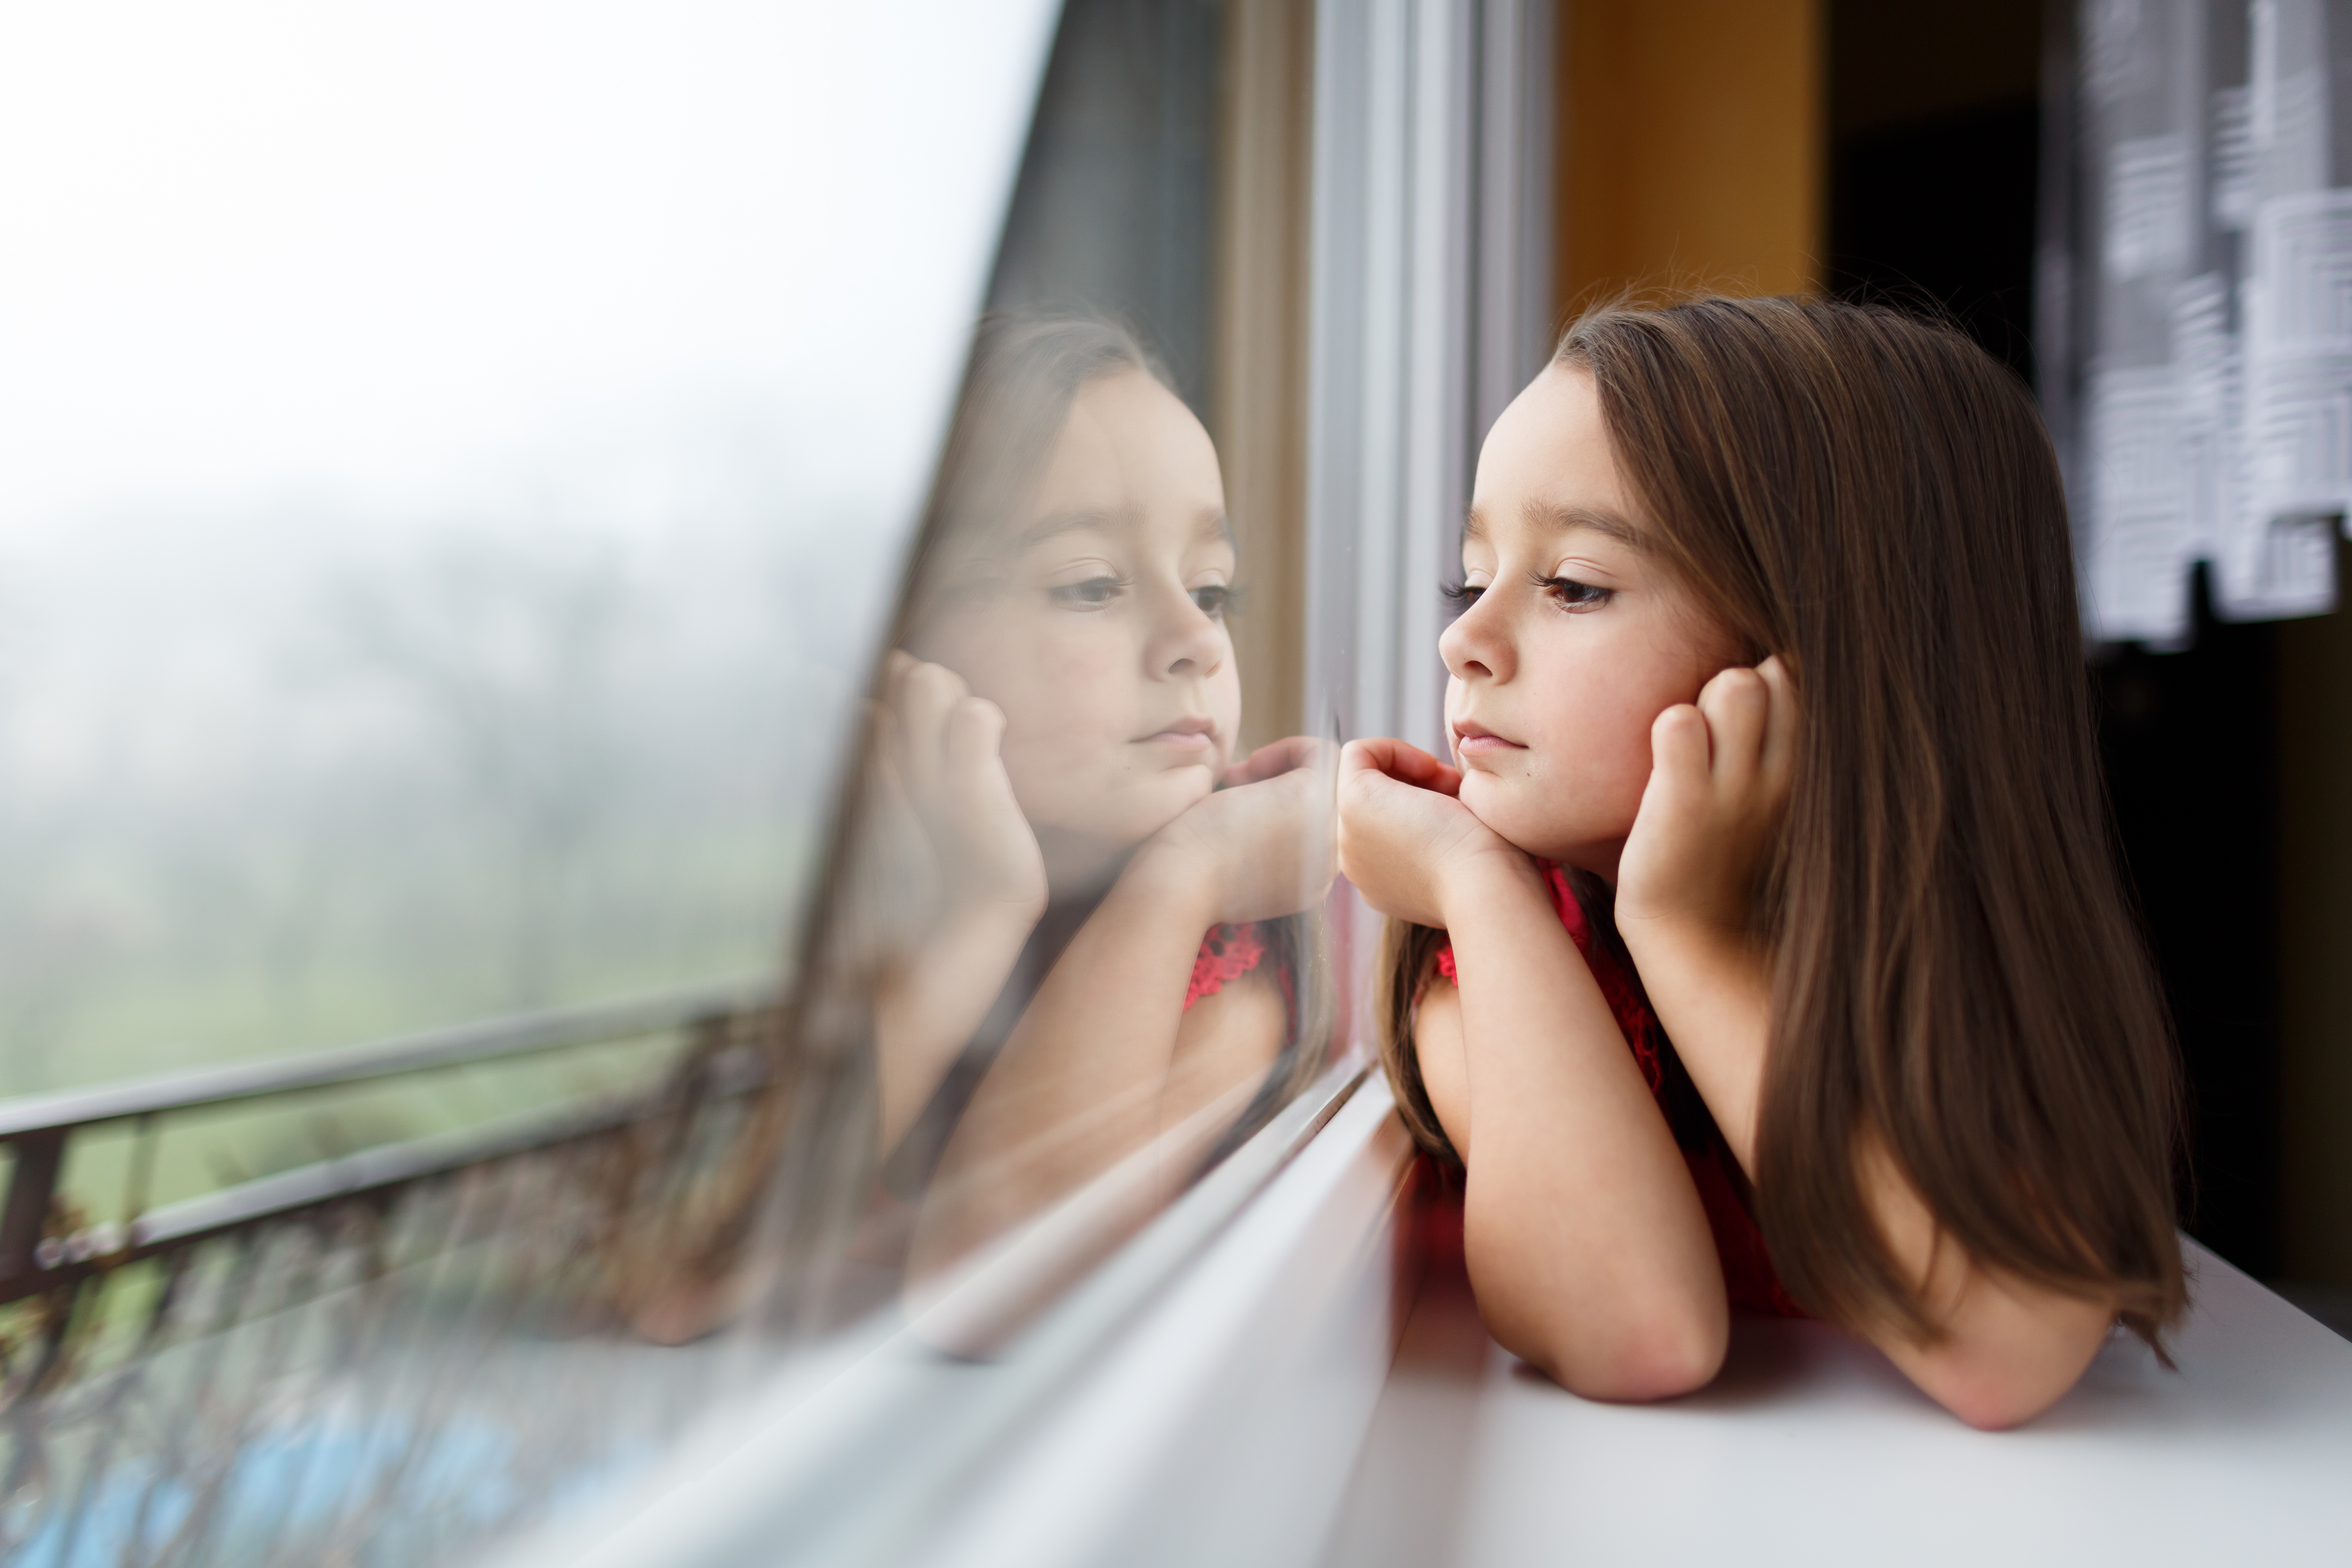 Little girl looking out the window | Source: Shutterstock